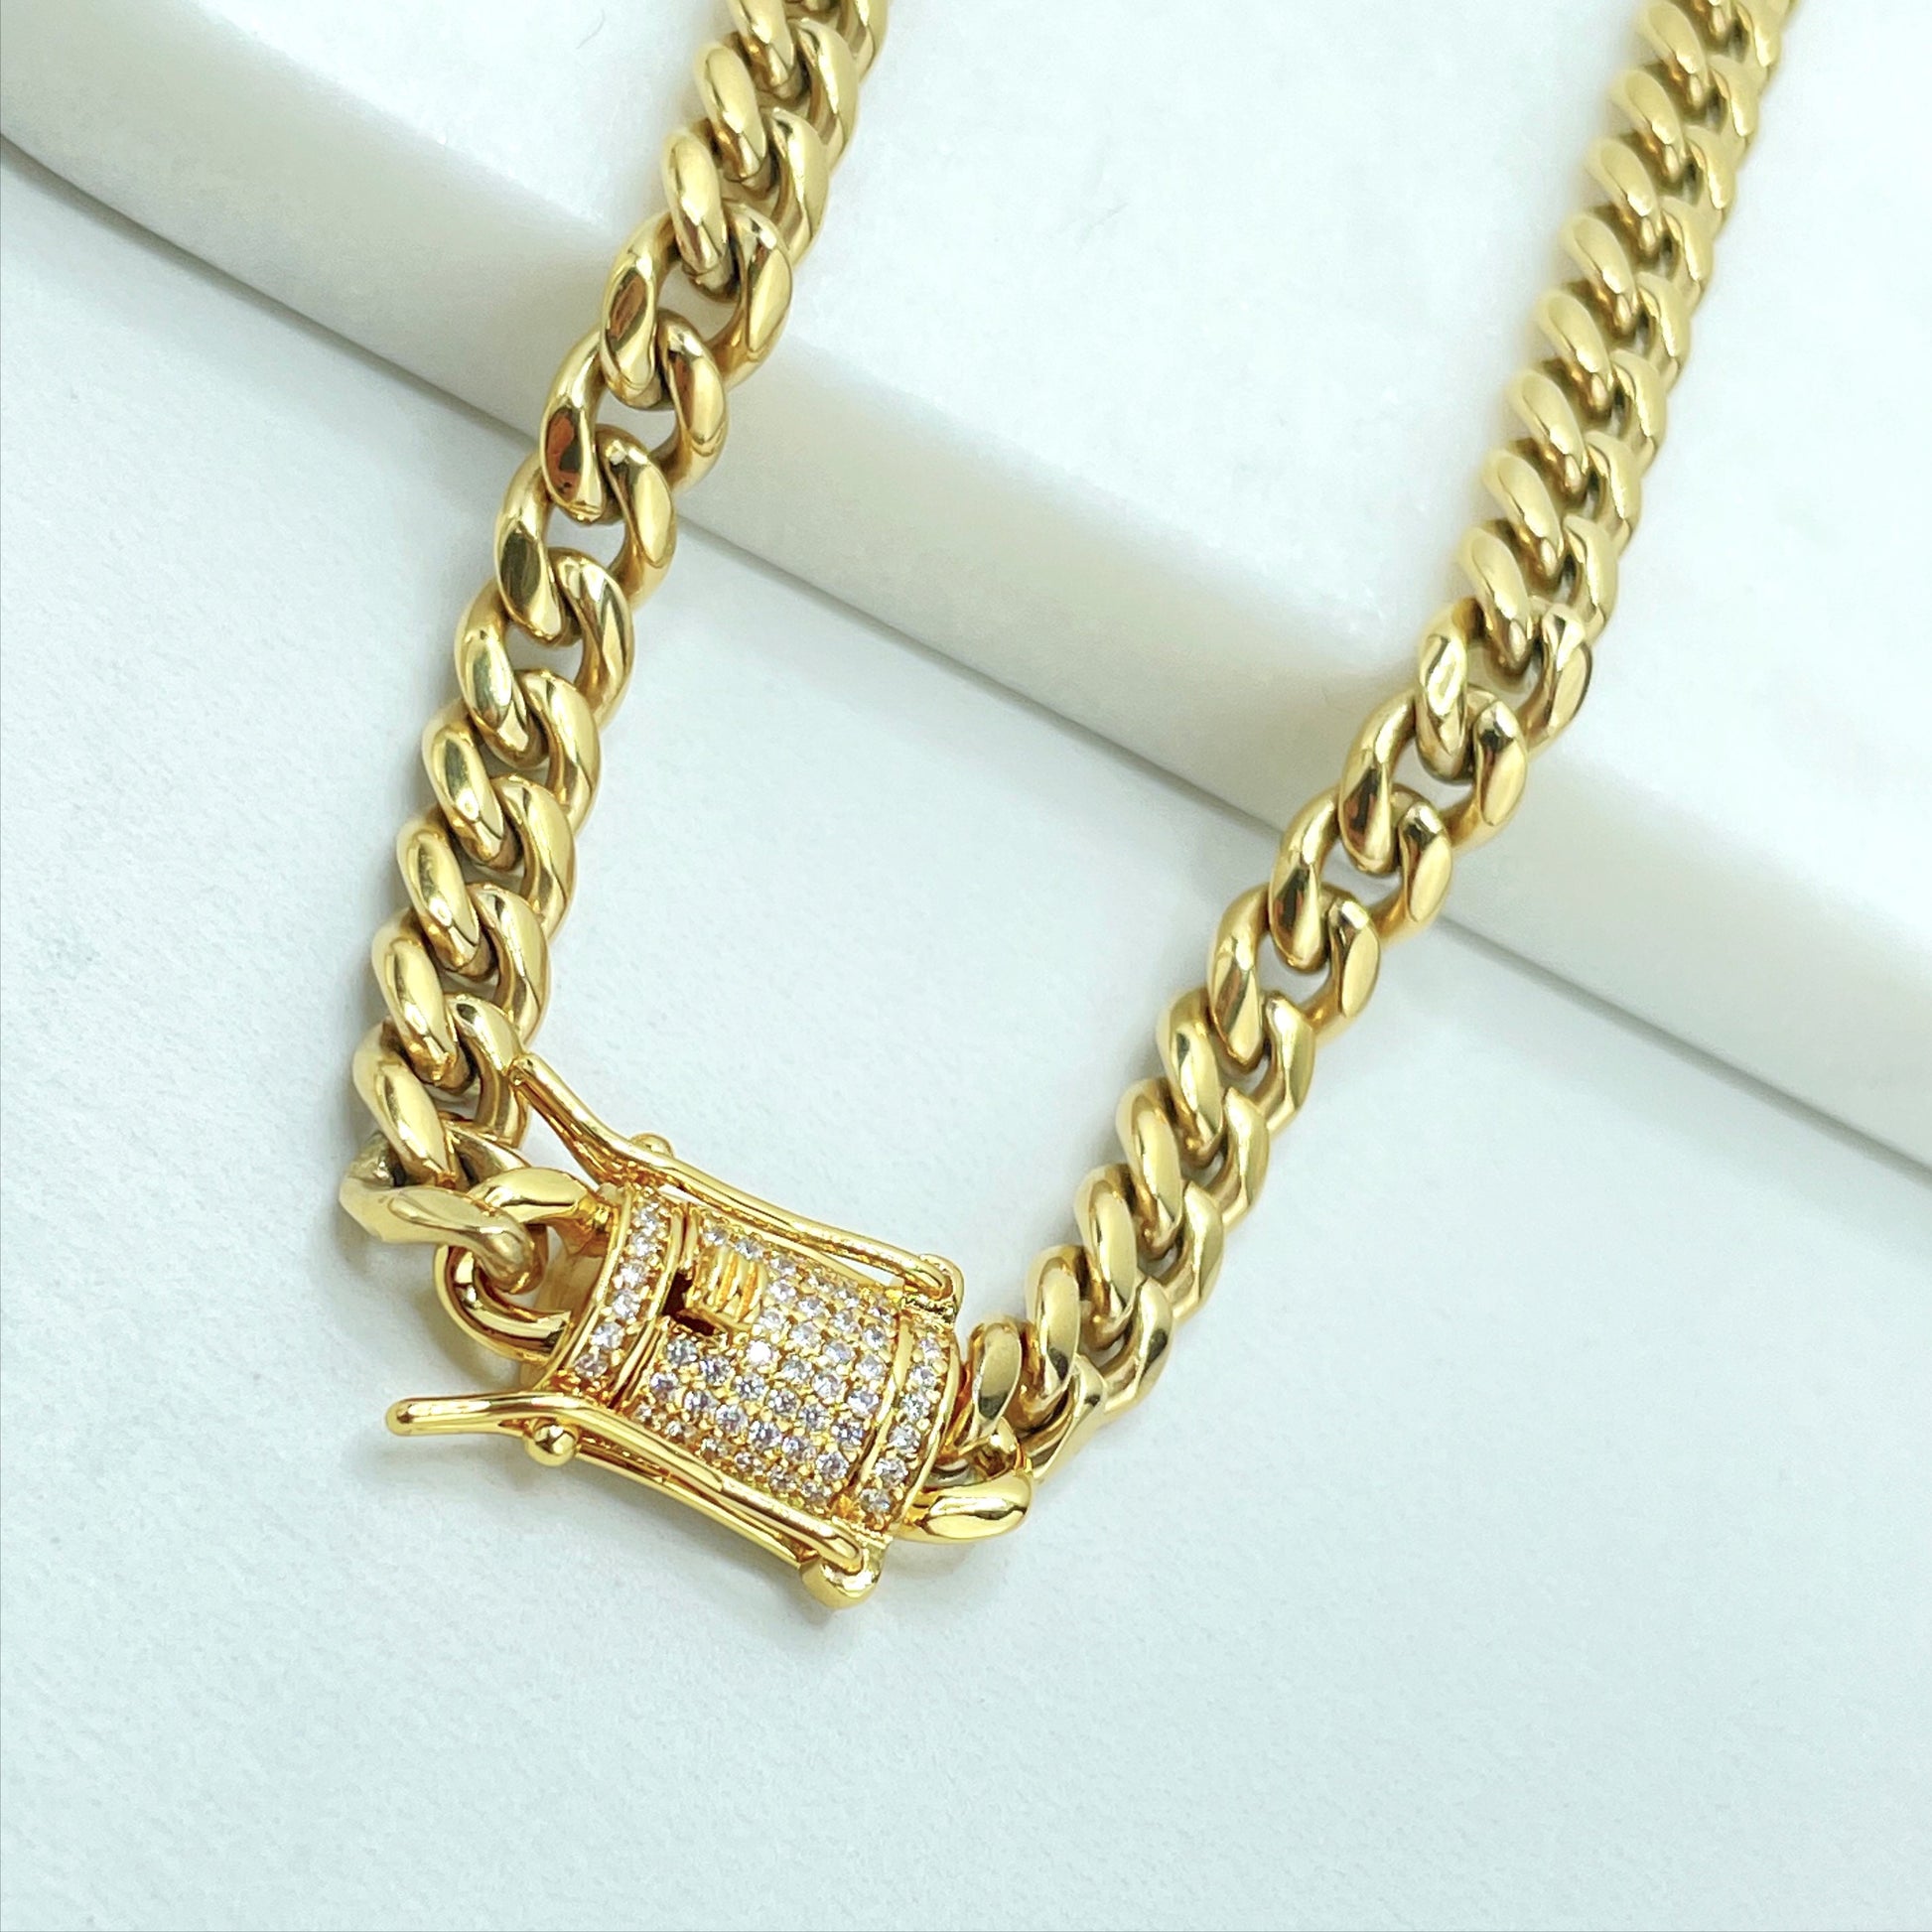 14k Gold Filled Miami Cuban Link 6mm Bracelet or Chain Double Safety Lock Box Clasp In Micro Pave Cubic Zirconia Wholesale Jewelry Supplies